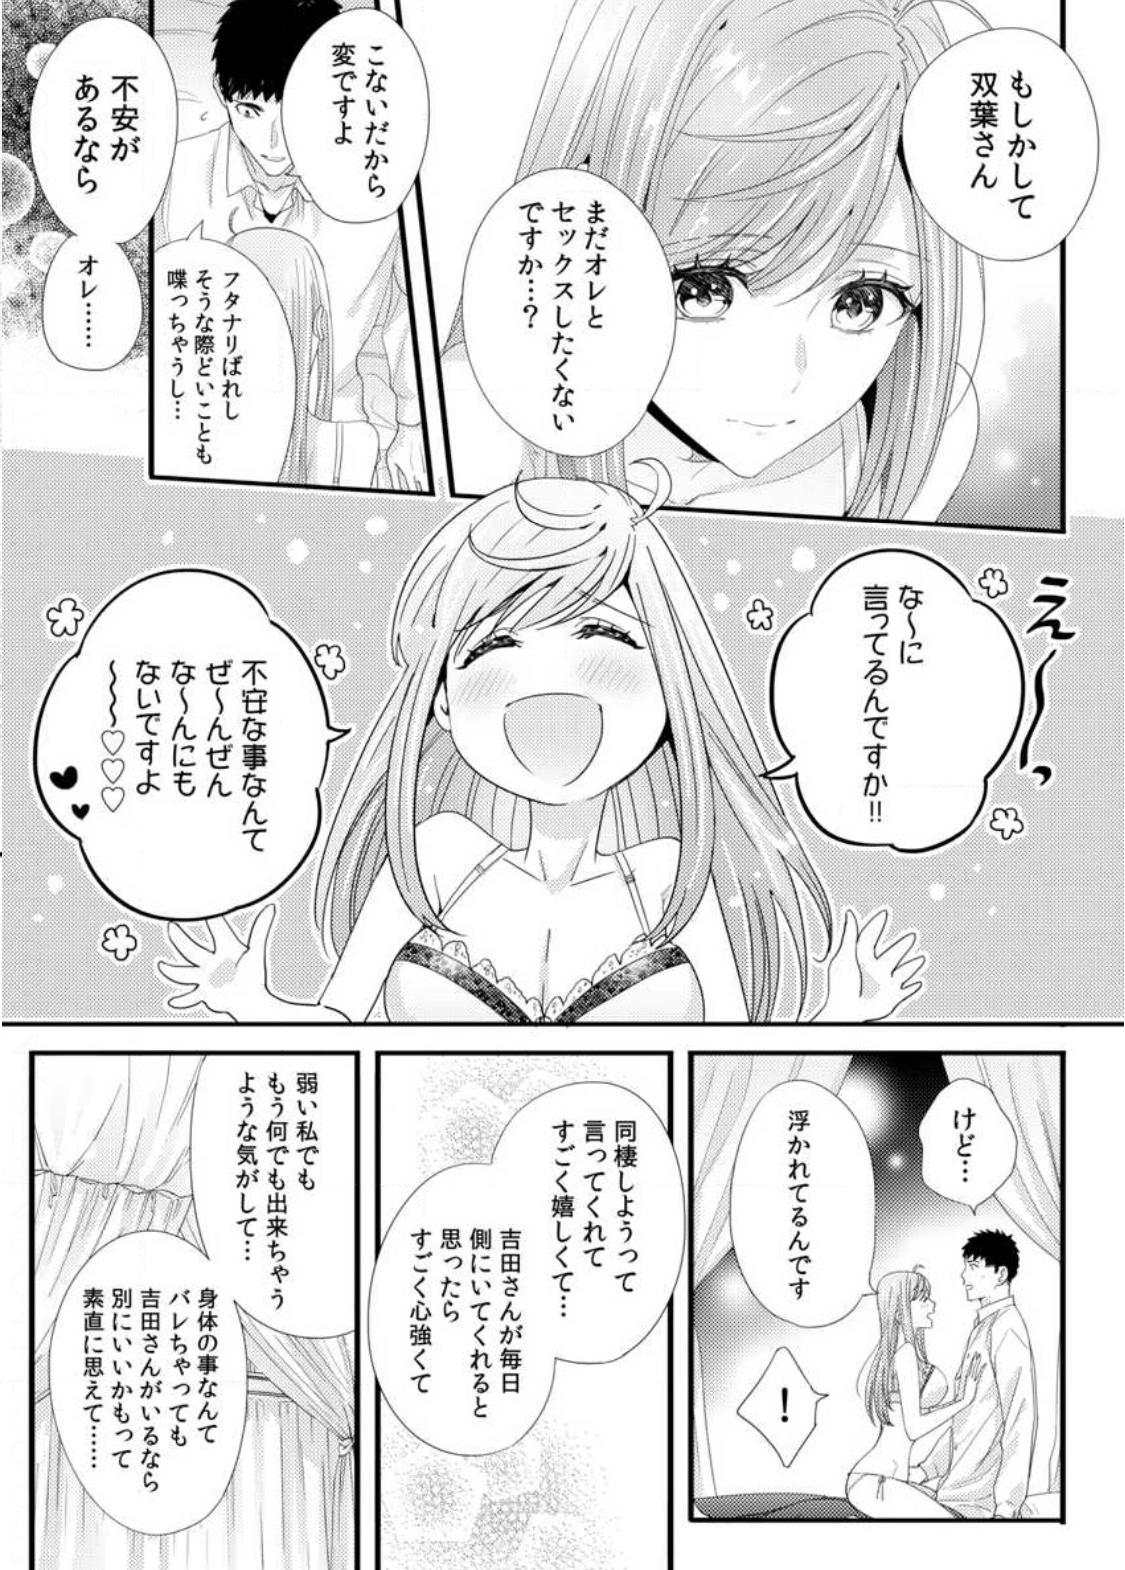 Please Let Me Hold You Futaba-San! Ch. 1-4 92